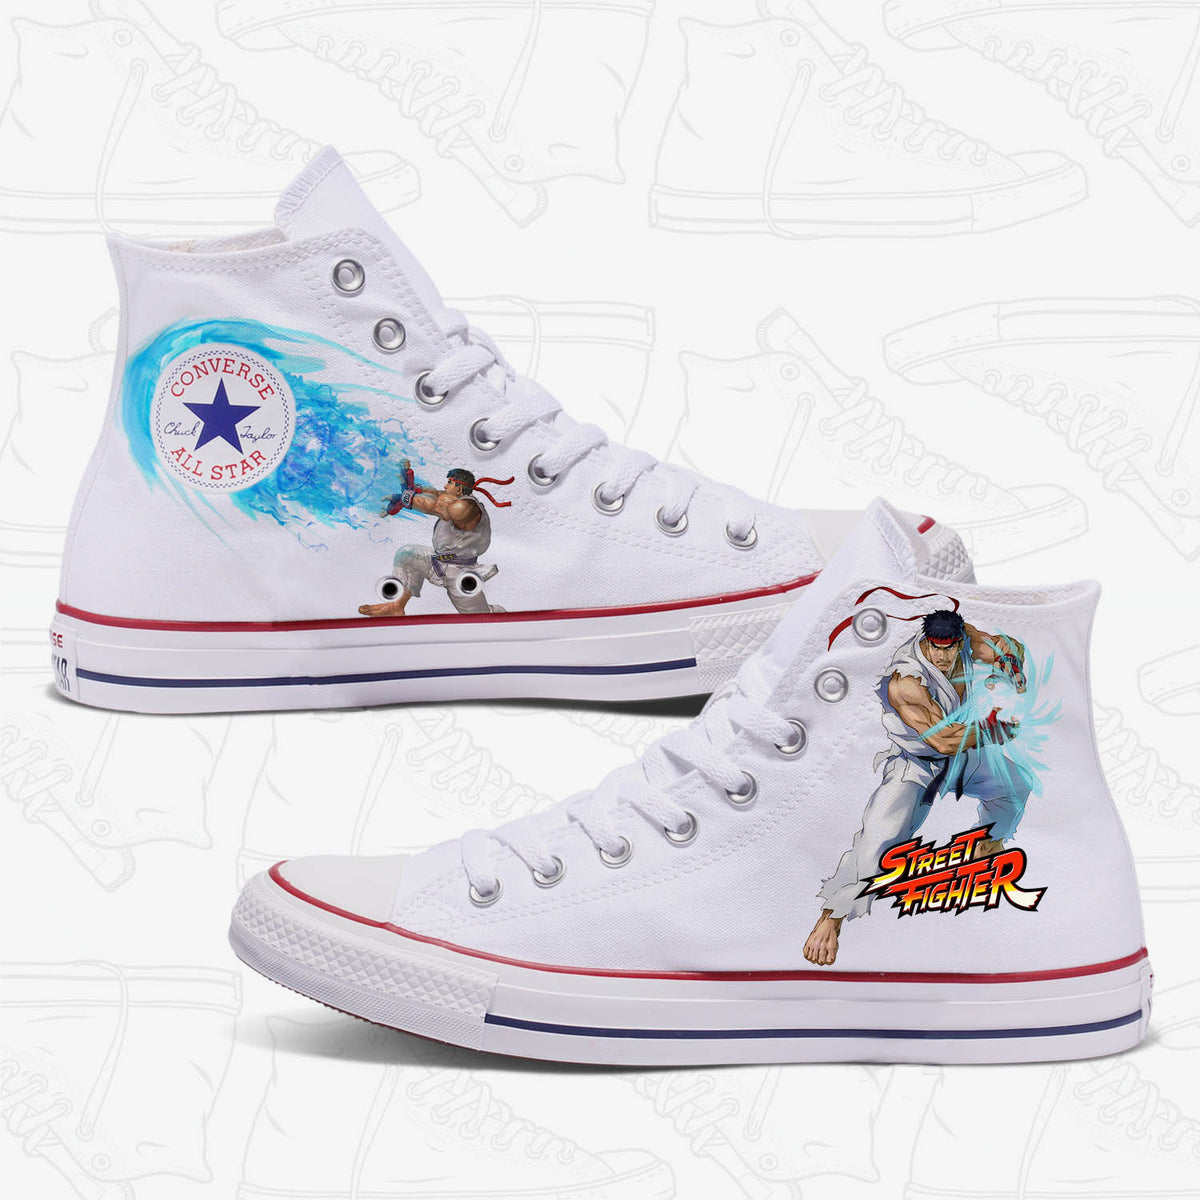 Street Fighter Converse Shoes